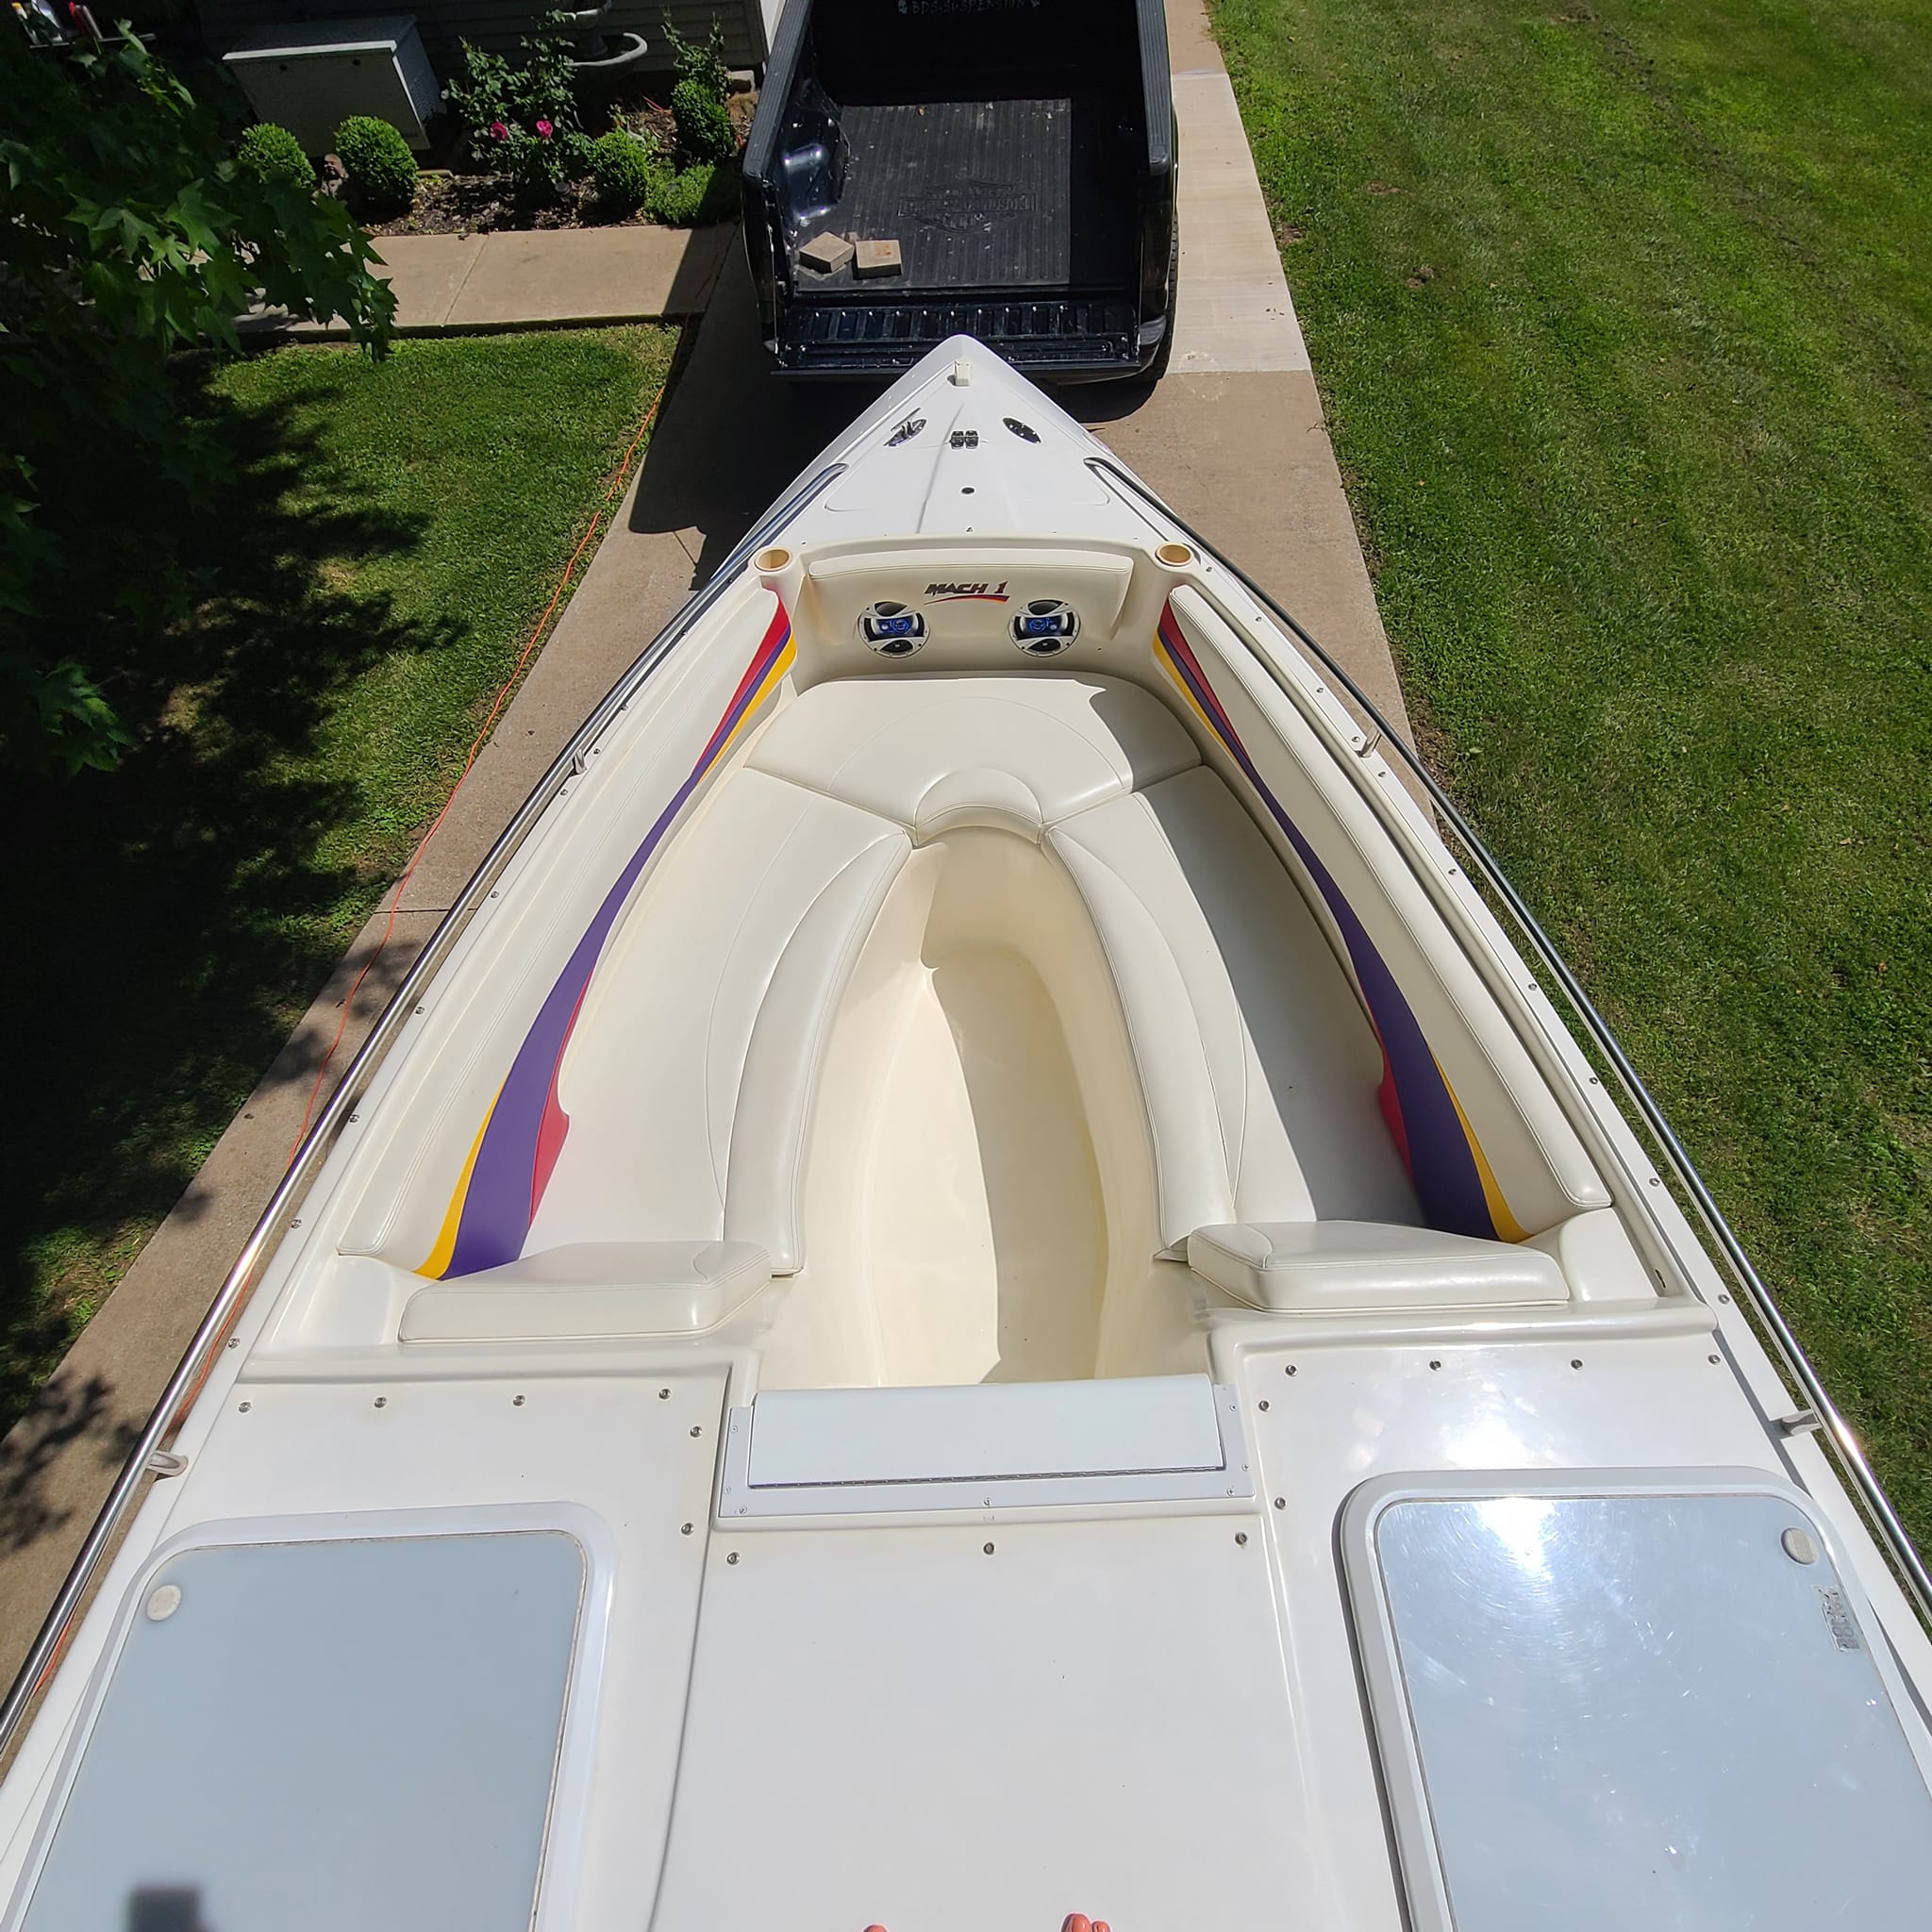 2000 Baja Mach 1 Power boat for sale in Purdy, MO - image 10 